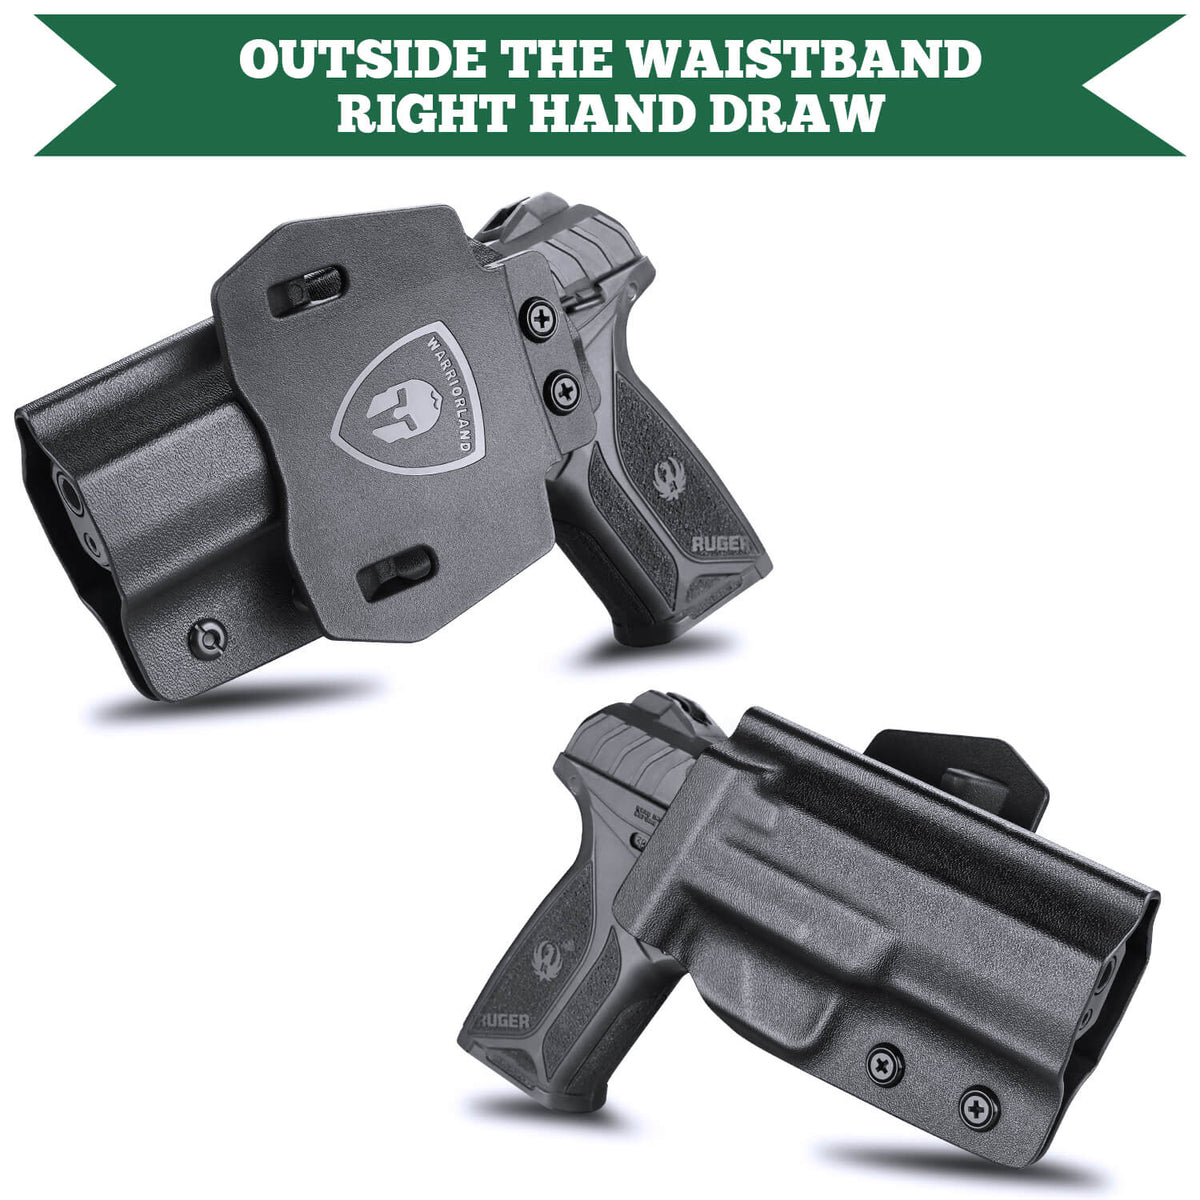 Open Carry OWB Kydex Paddle Holster for Ruger Security 9mm Compact with Red Dot Trigger Guard | WARRIORLAND